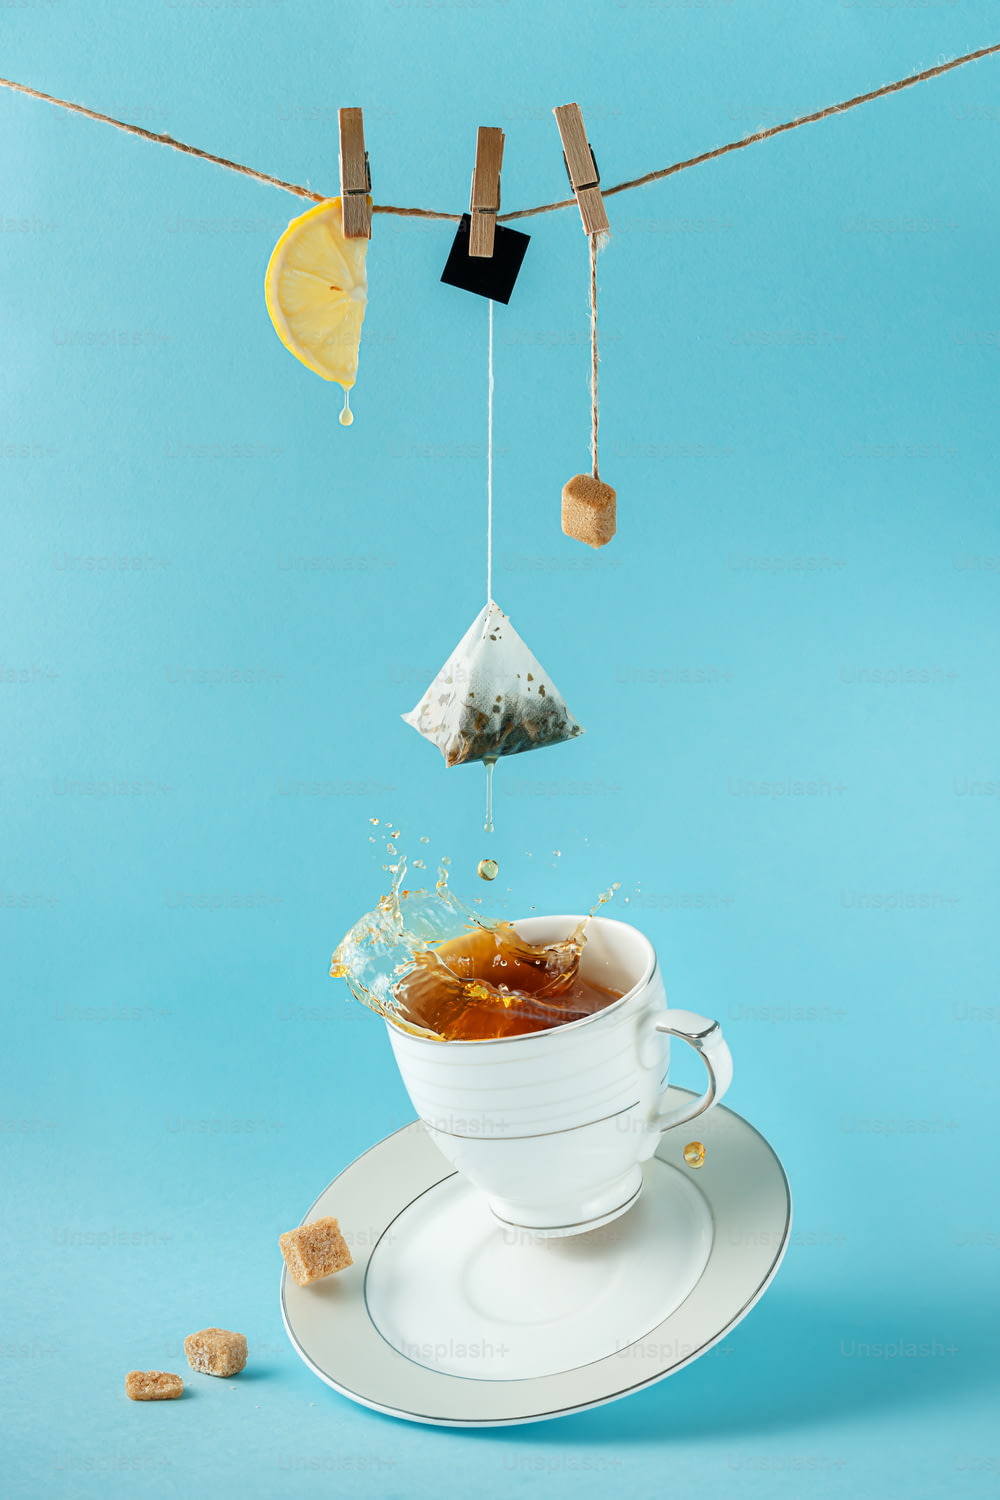 Tea bag, lemon and sugar hanging on the rope over splashing tea in the cup on blue background. Creative still life